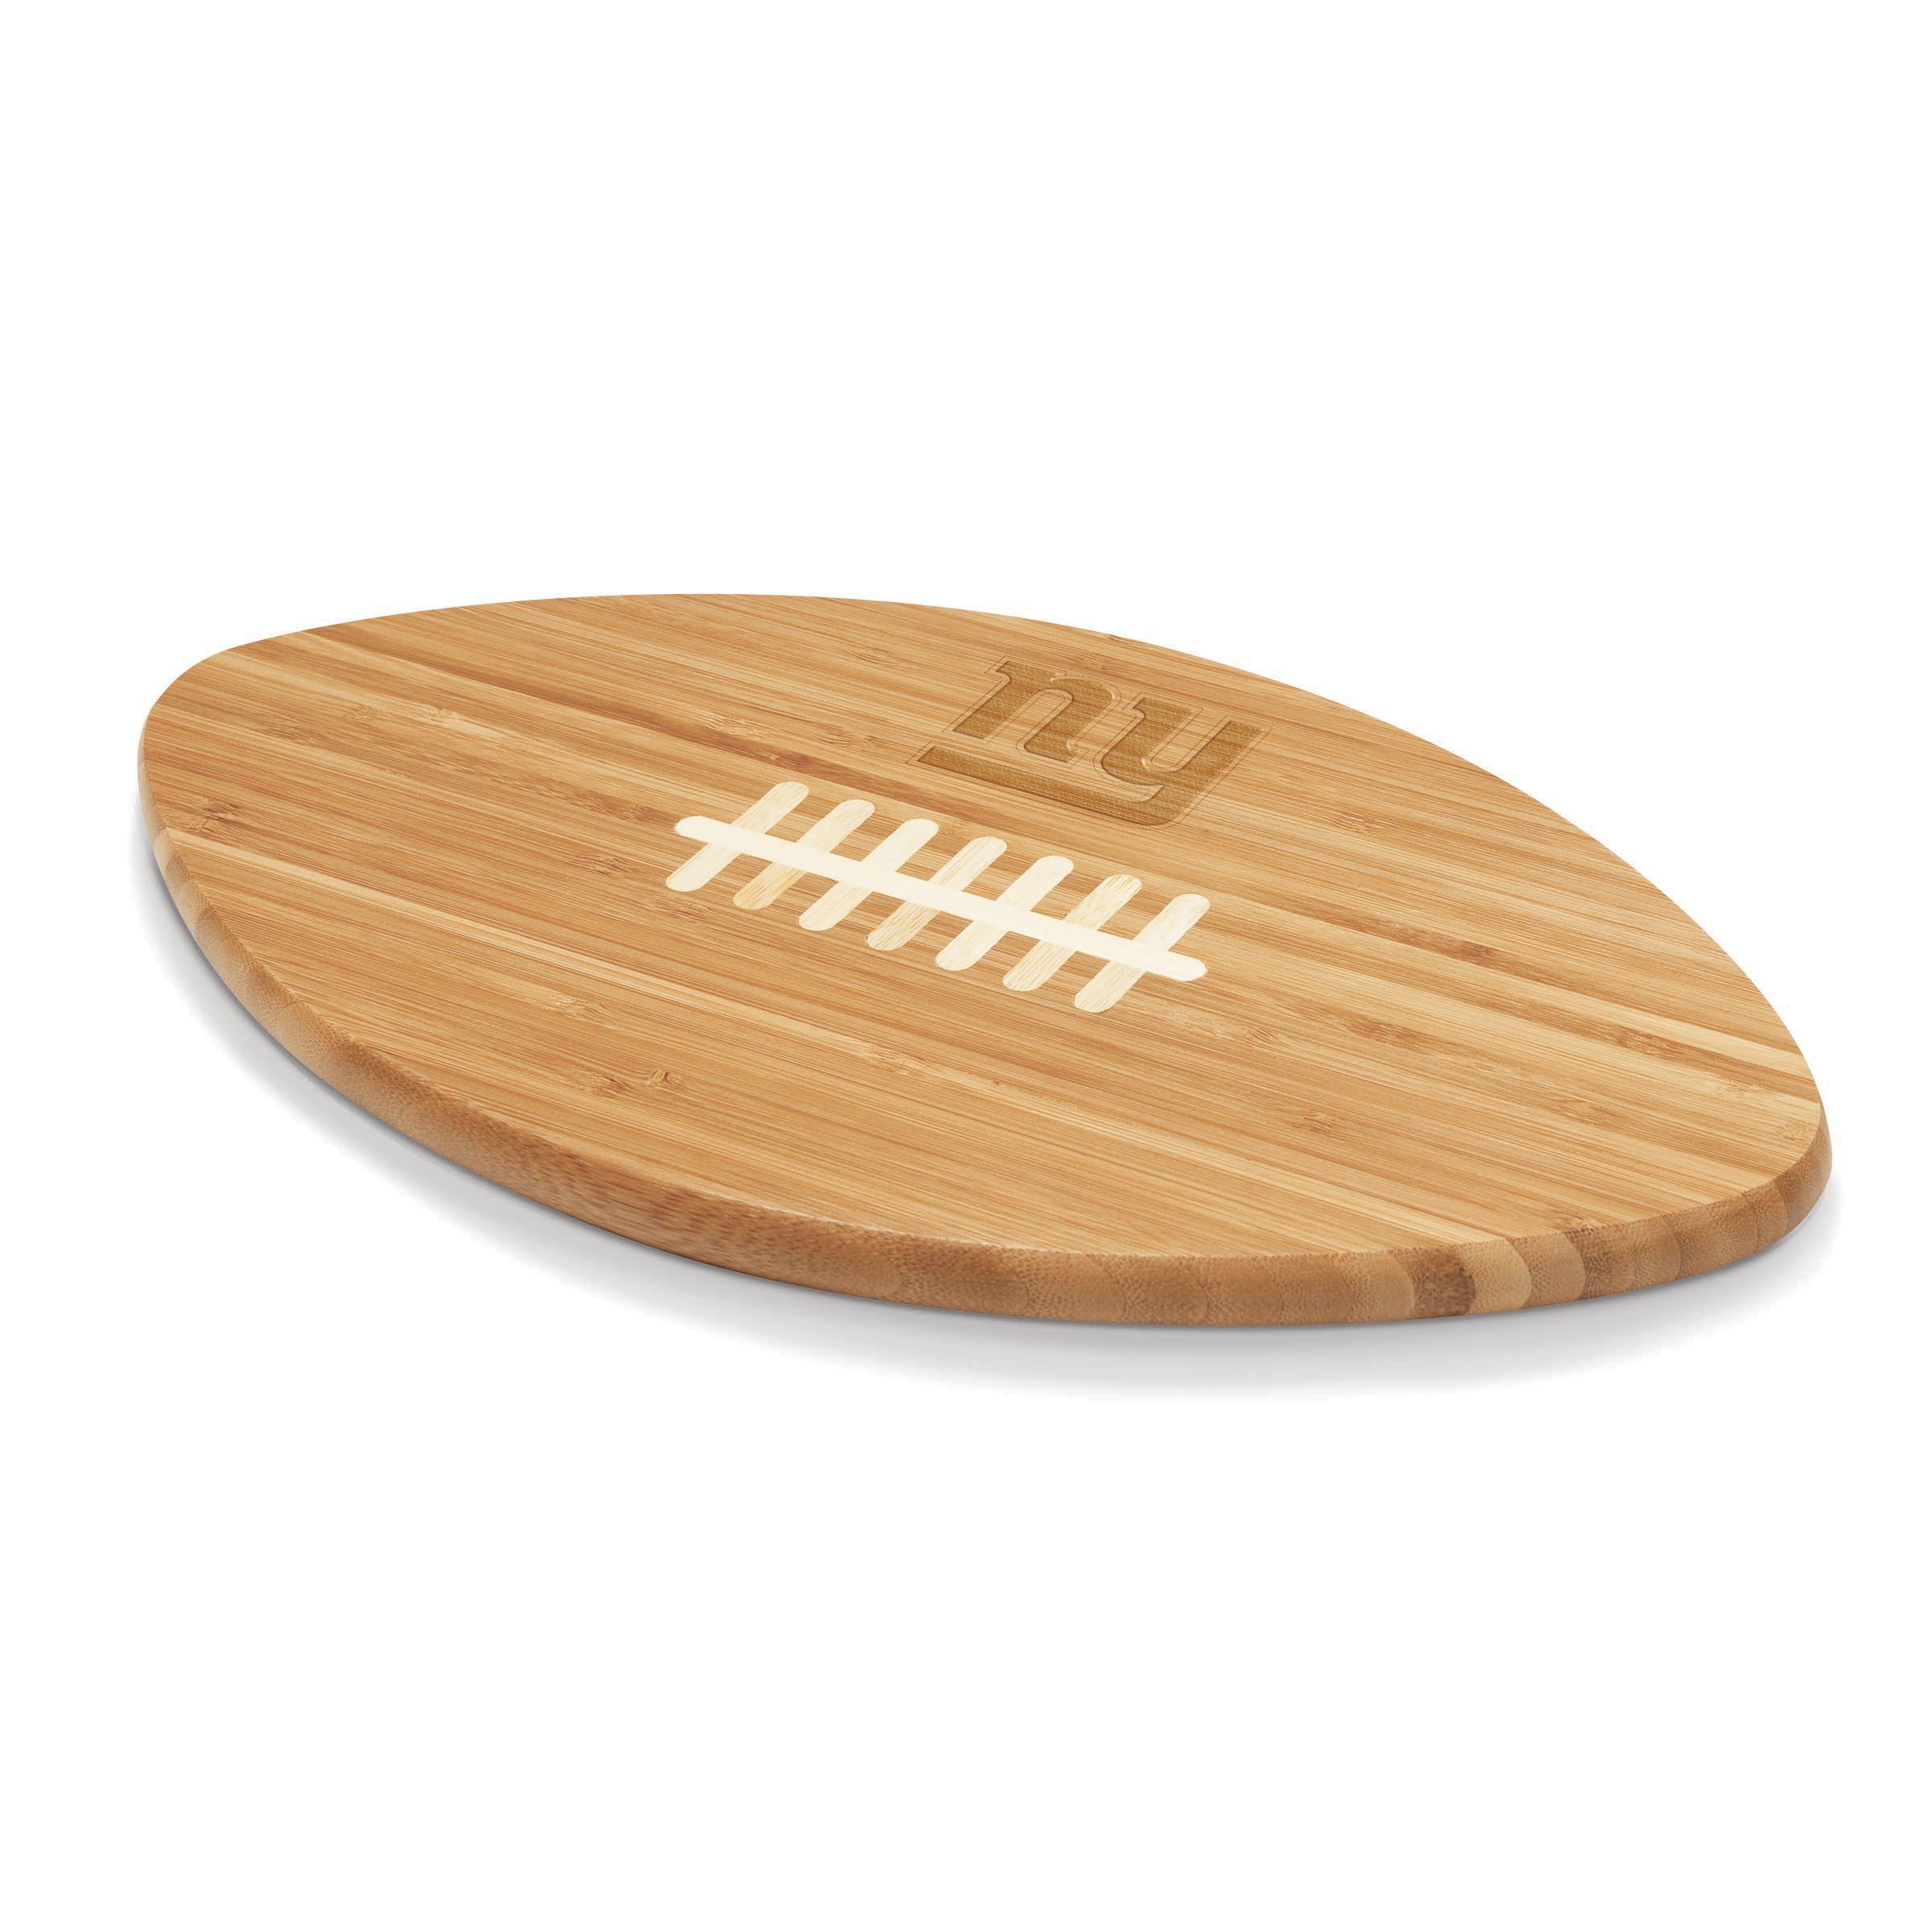 New York Giants - Touchdown! Football Cutting Board & Serving Tray